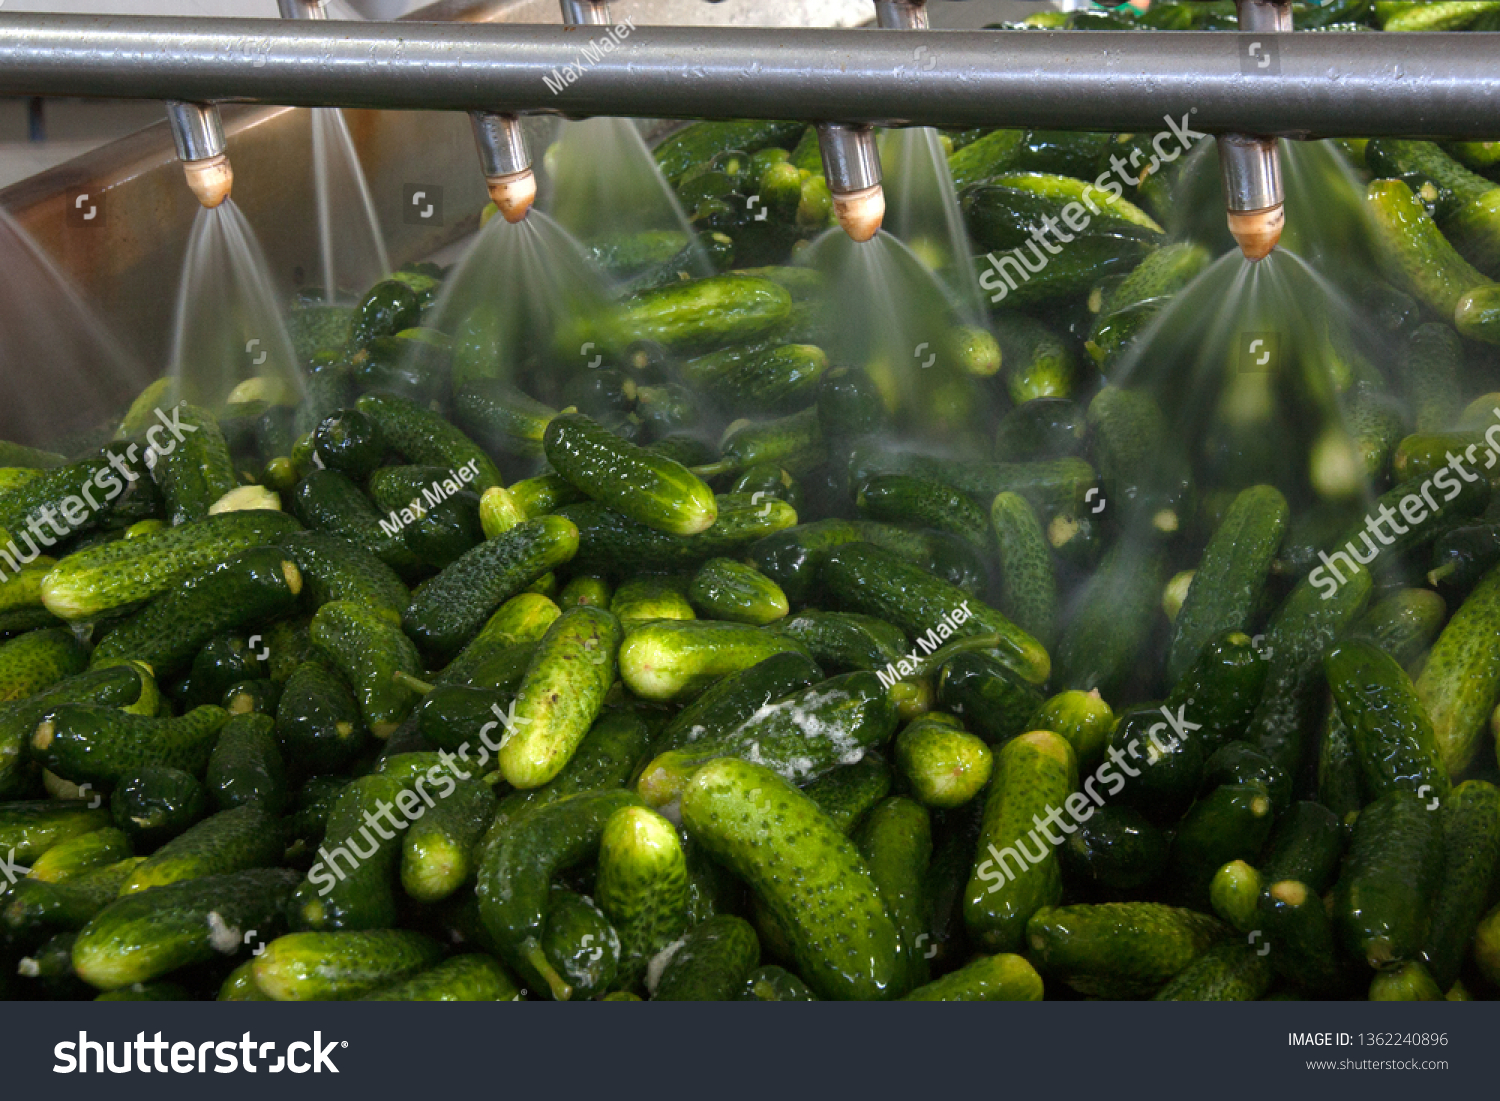 Working process of the production of cucumbers on cannery. Washing in water before preservation. Movement on the conveyor. #1362240896